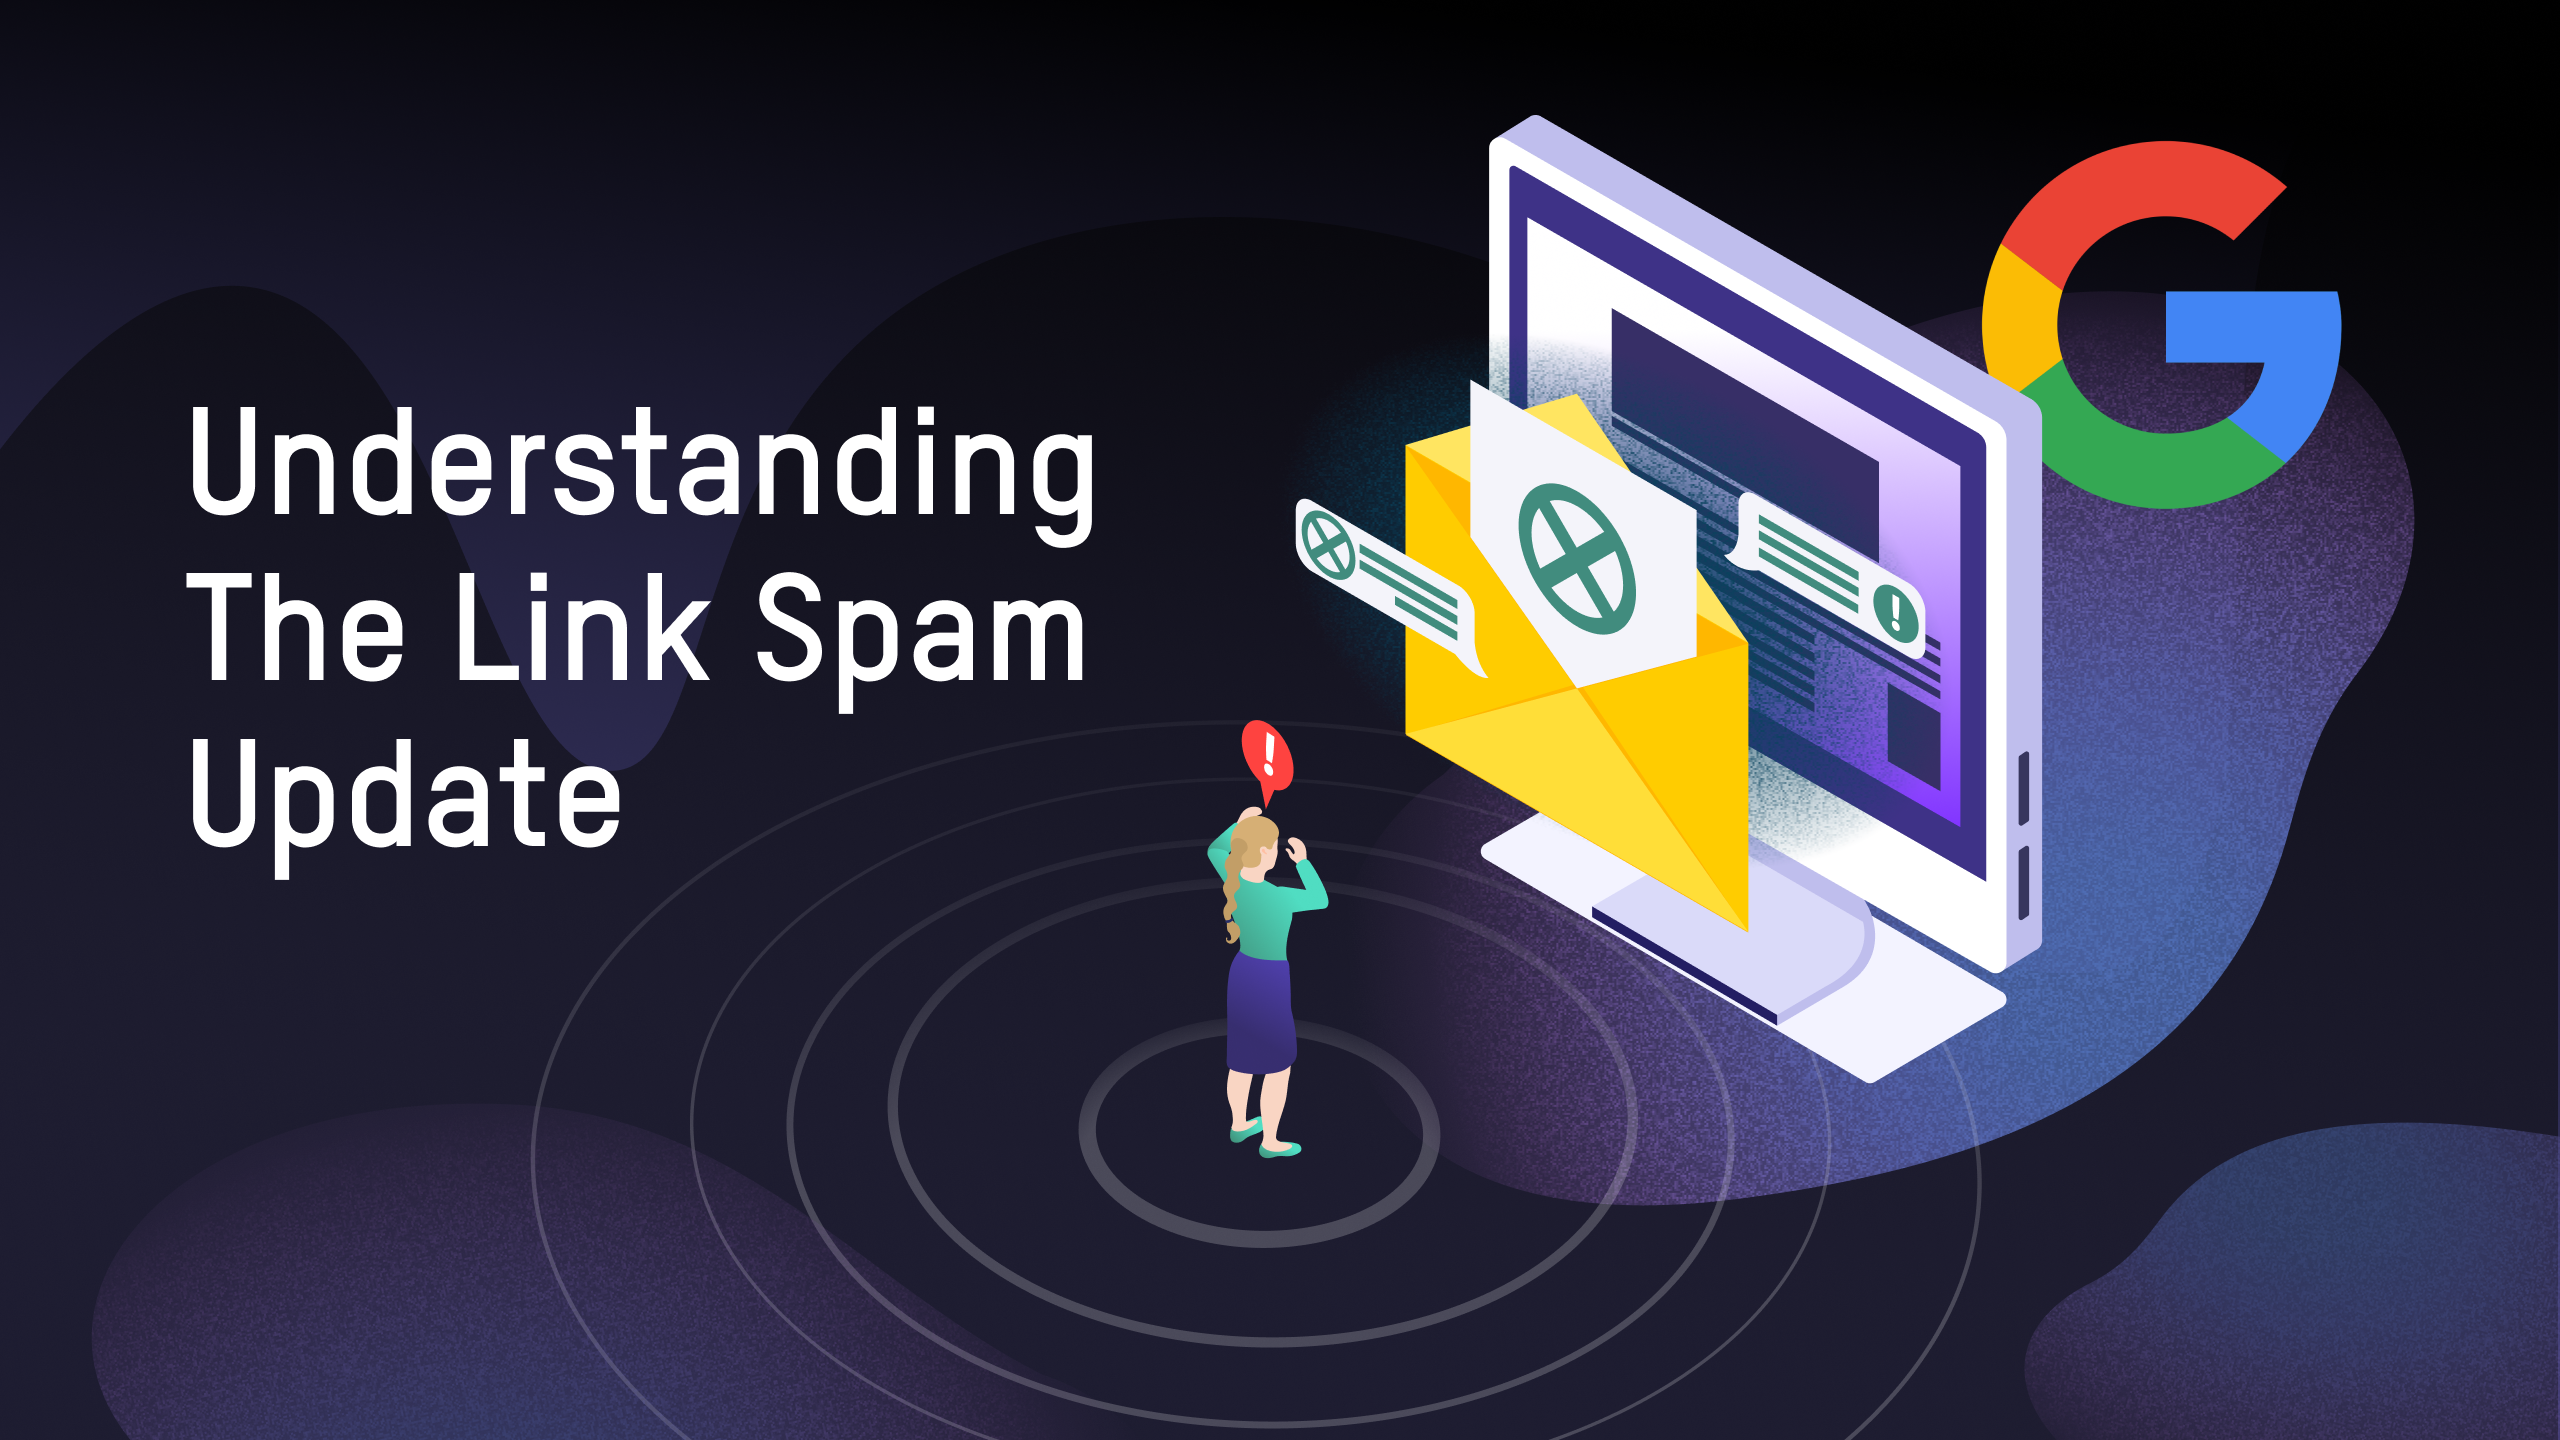 What You Need To Know About The Google Link Spam Update